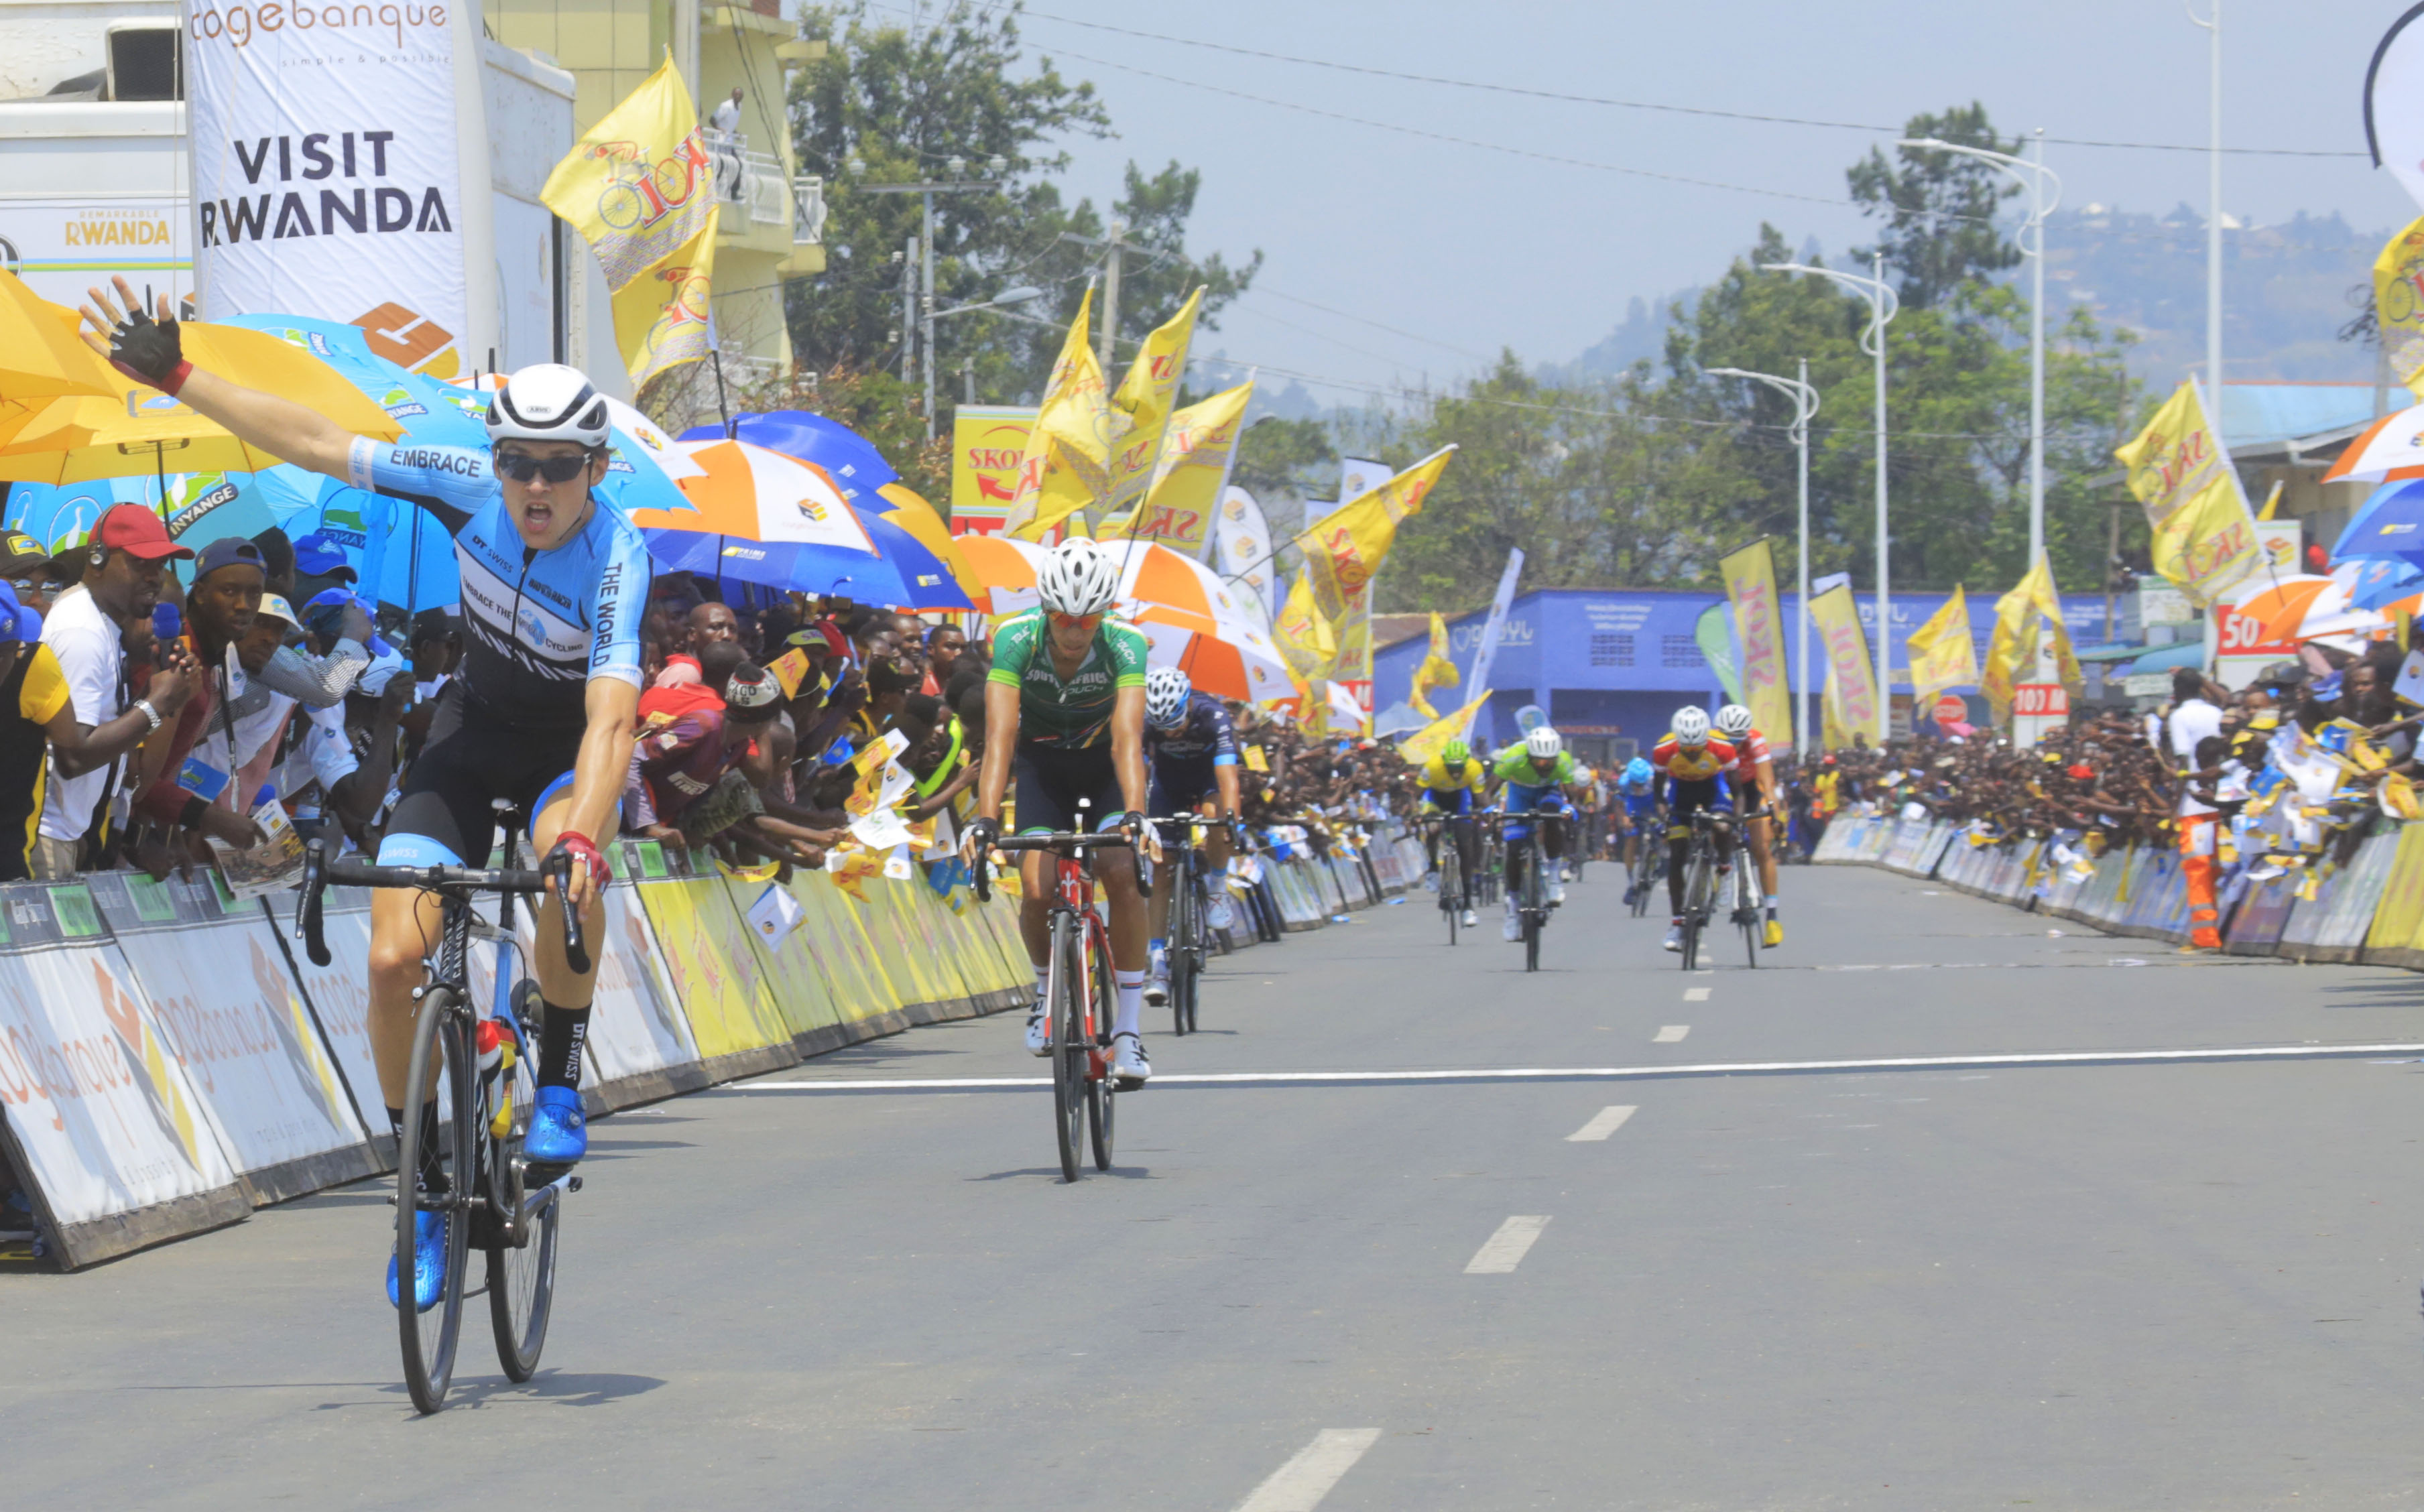 German Julian Hellmann holds up his palm in triumph as he celebrated his second stage victory at the ongoing 10th edition of Tour du Rwanda. The 27-year old also won Stage 3 from Nyanza to Musanze on Tuesday. (Sam Ngendahimana)